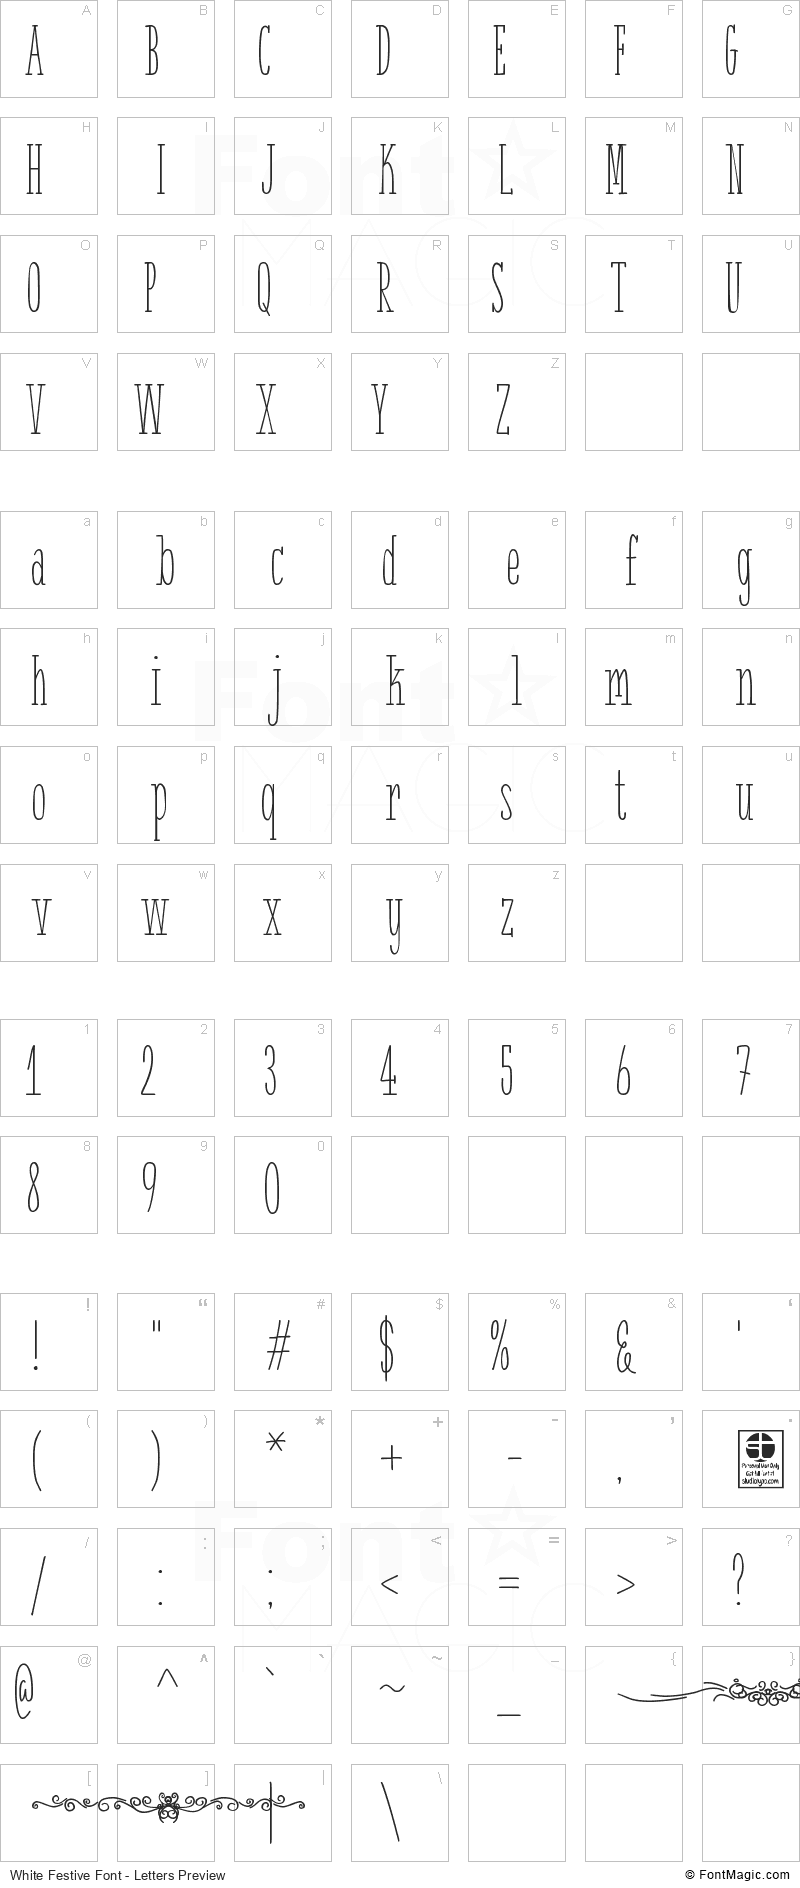 White Festive Font - All Latters Preview Chart